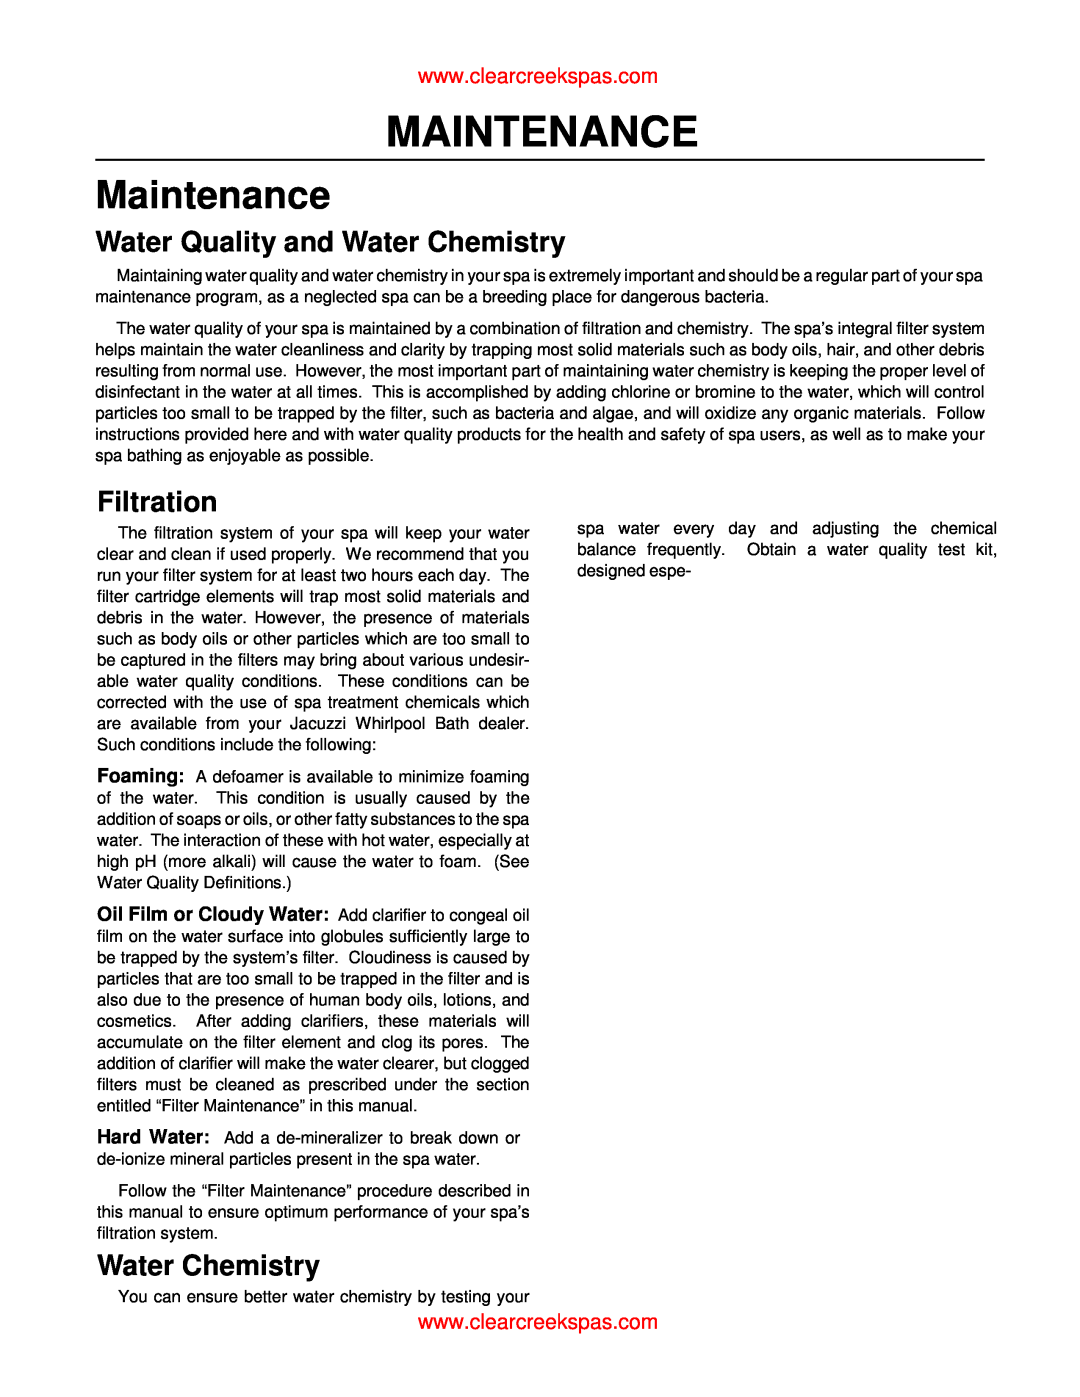 Whirlpool oortable spa owner manual Maintenance, Water Quality and Water Chemistry, Filtration 